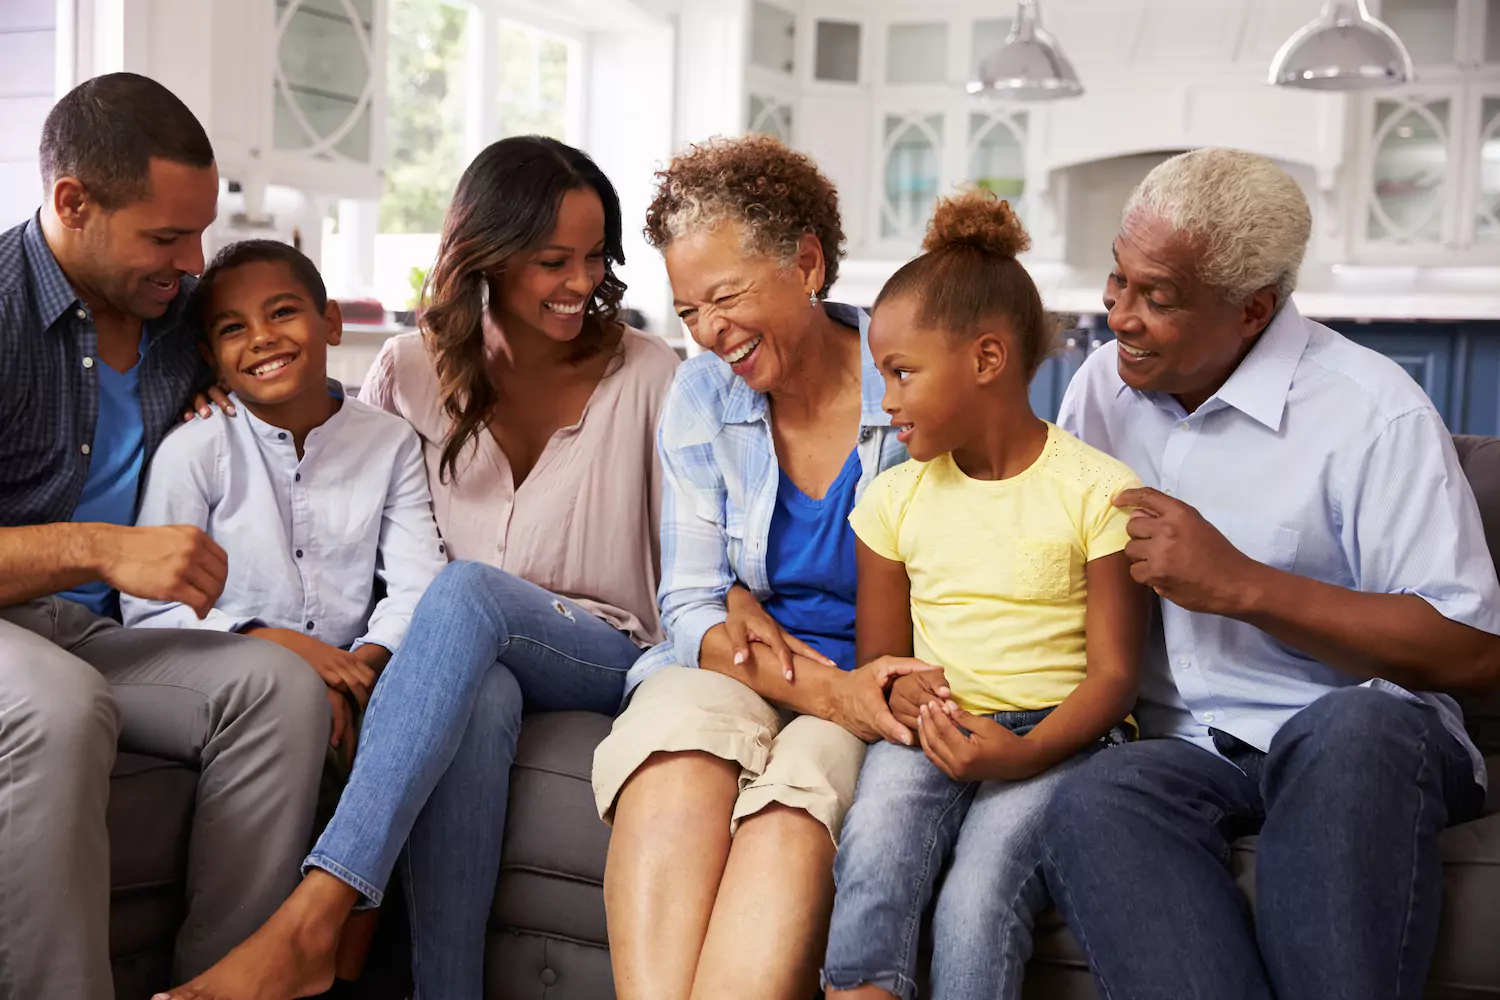 An extended African American family of two parents, two grandparents, and two kids sit on a couch enjoying each other's company. Setting boundaries with in-laws is important.